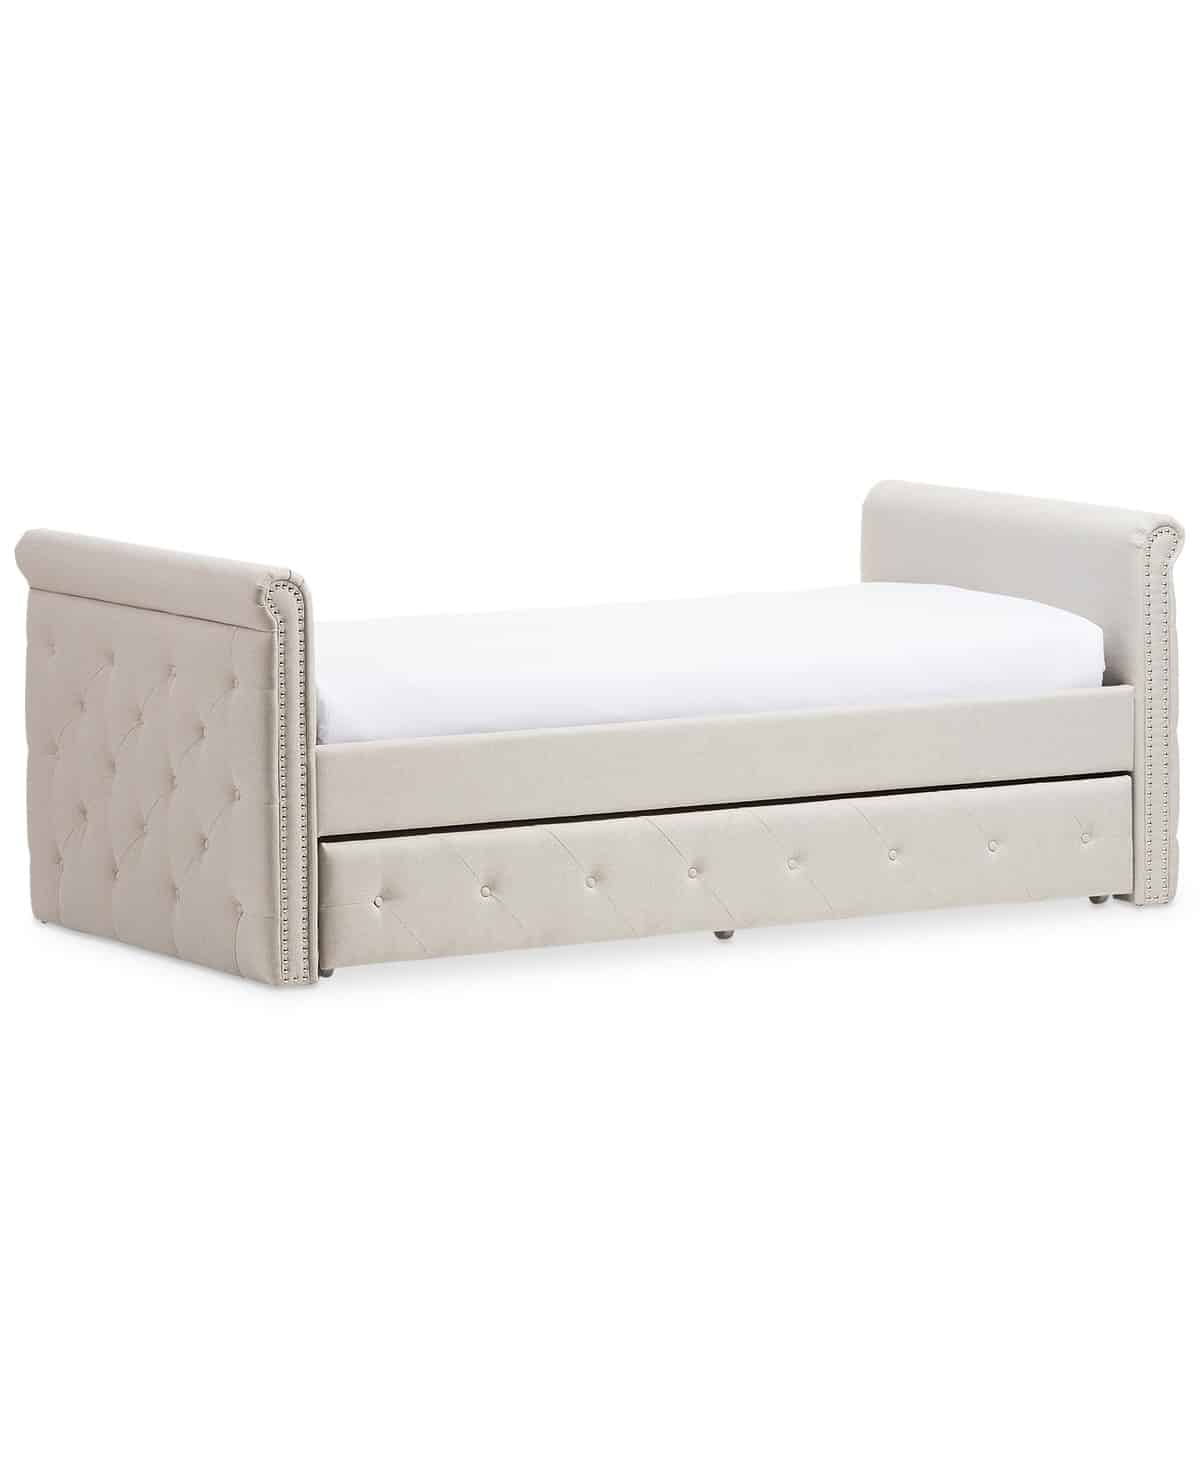 swanson daybed twin